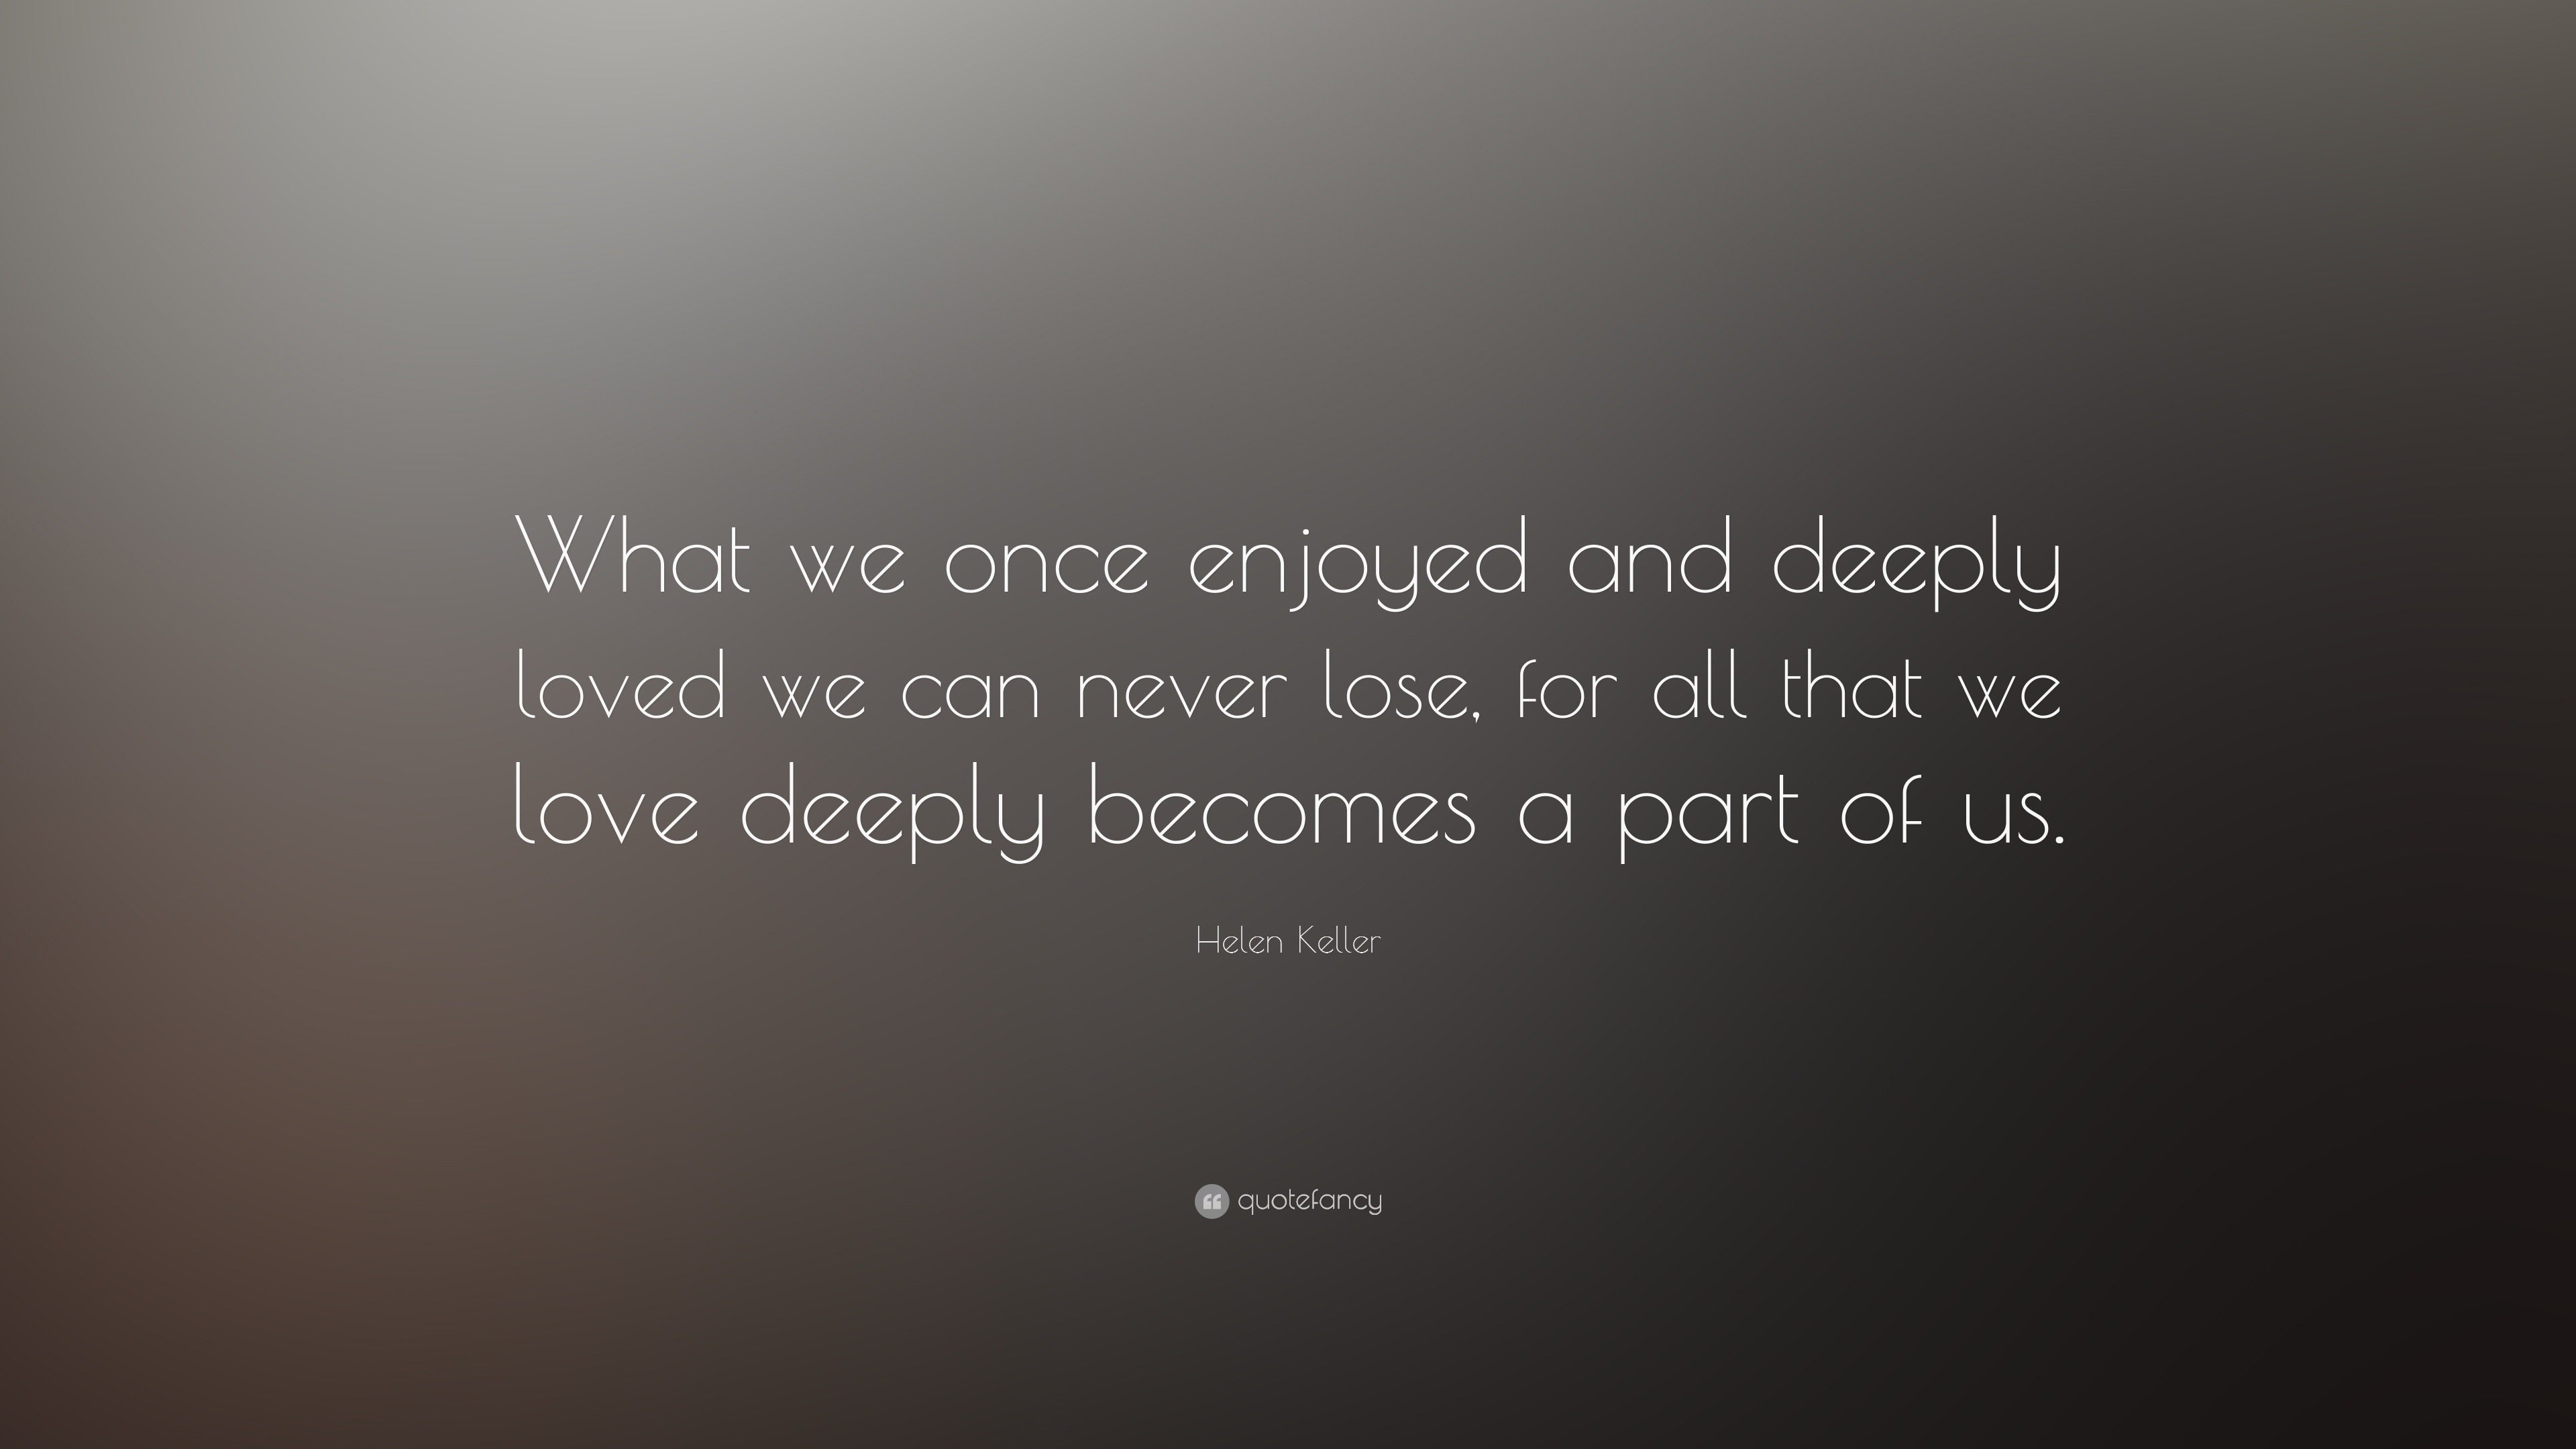 Helen Keller Quote “What we once enjoyed and deeply loved we can never lose